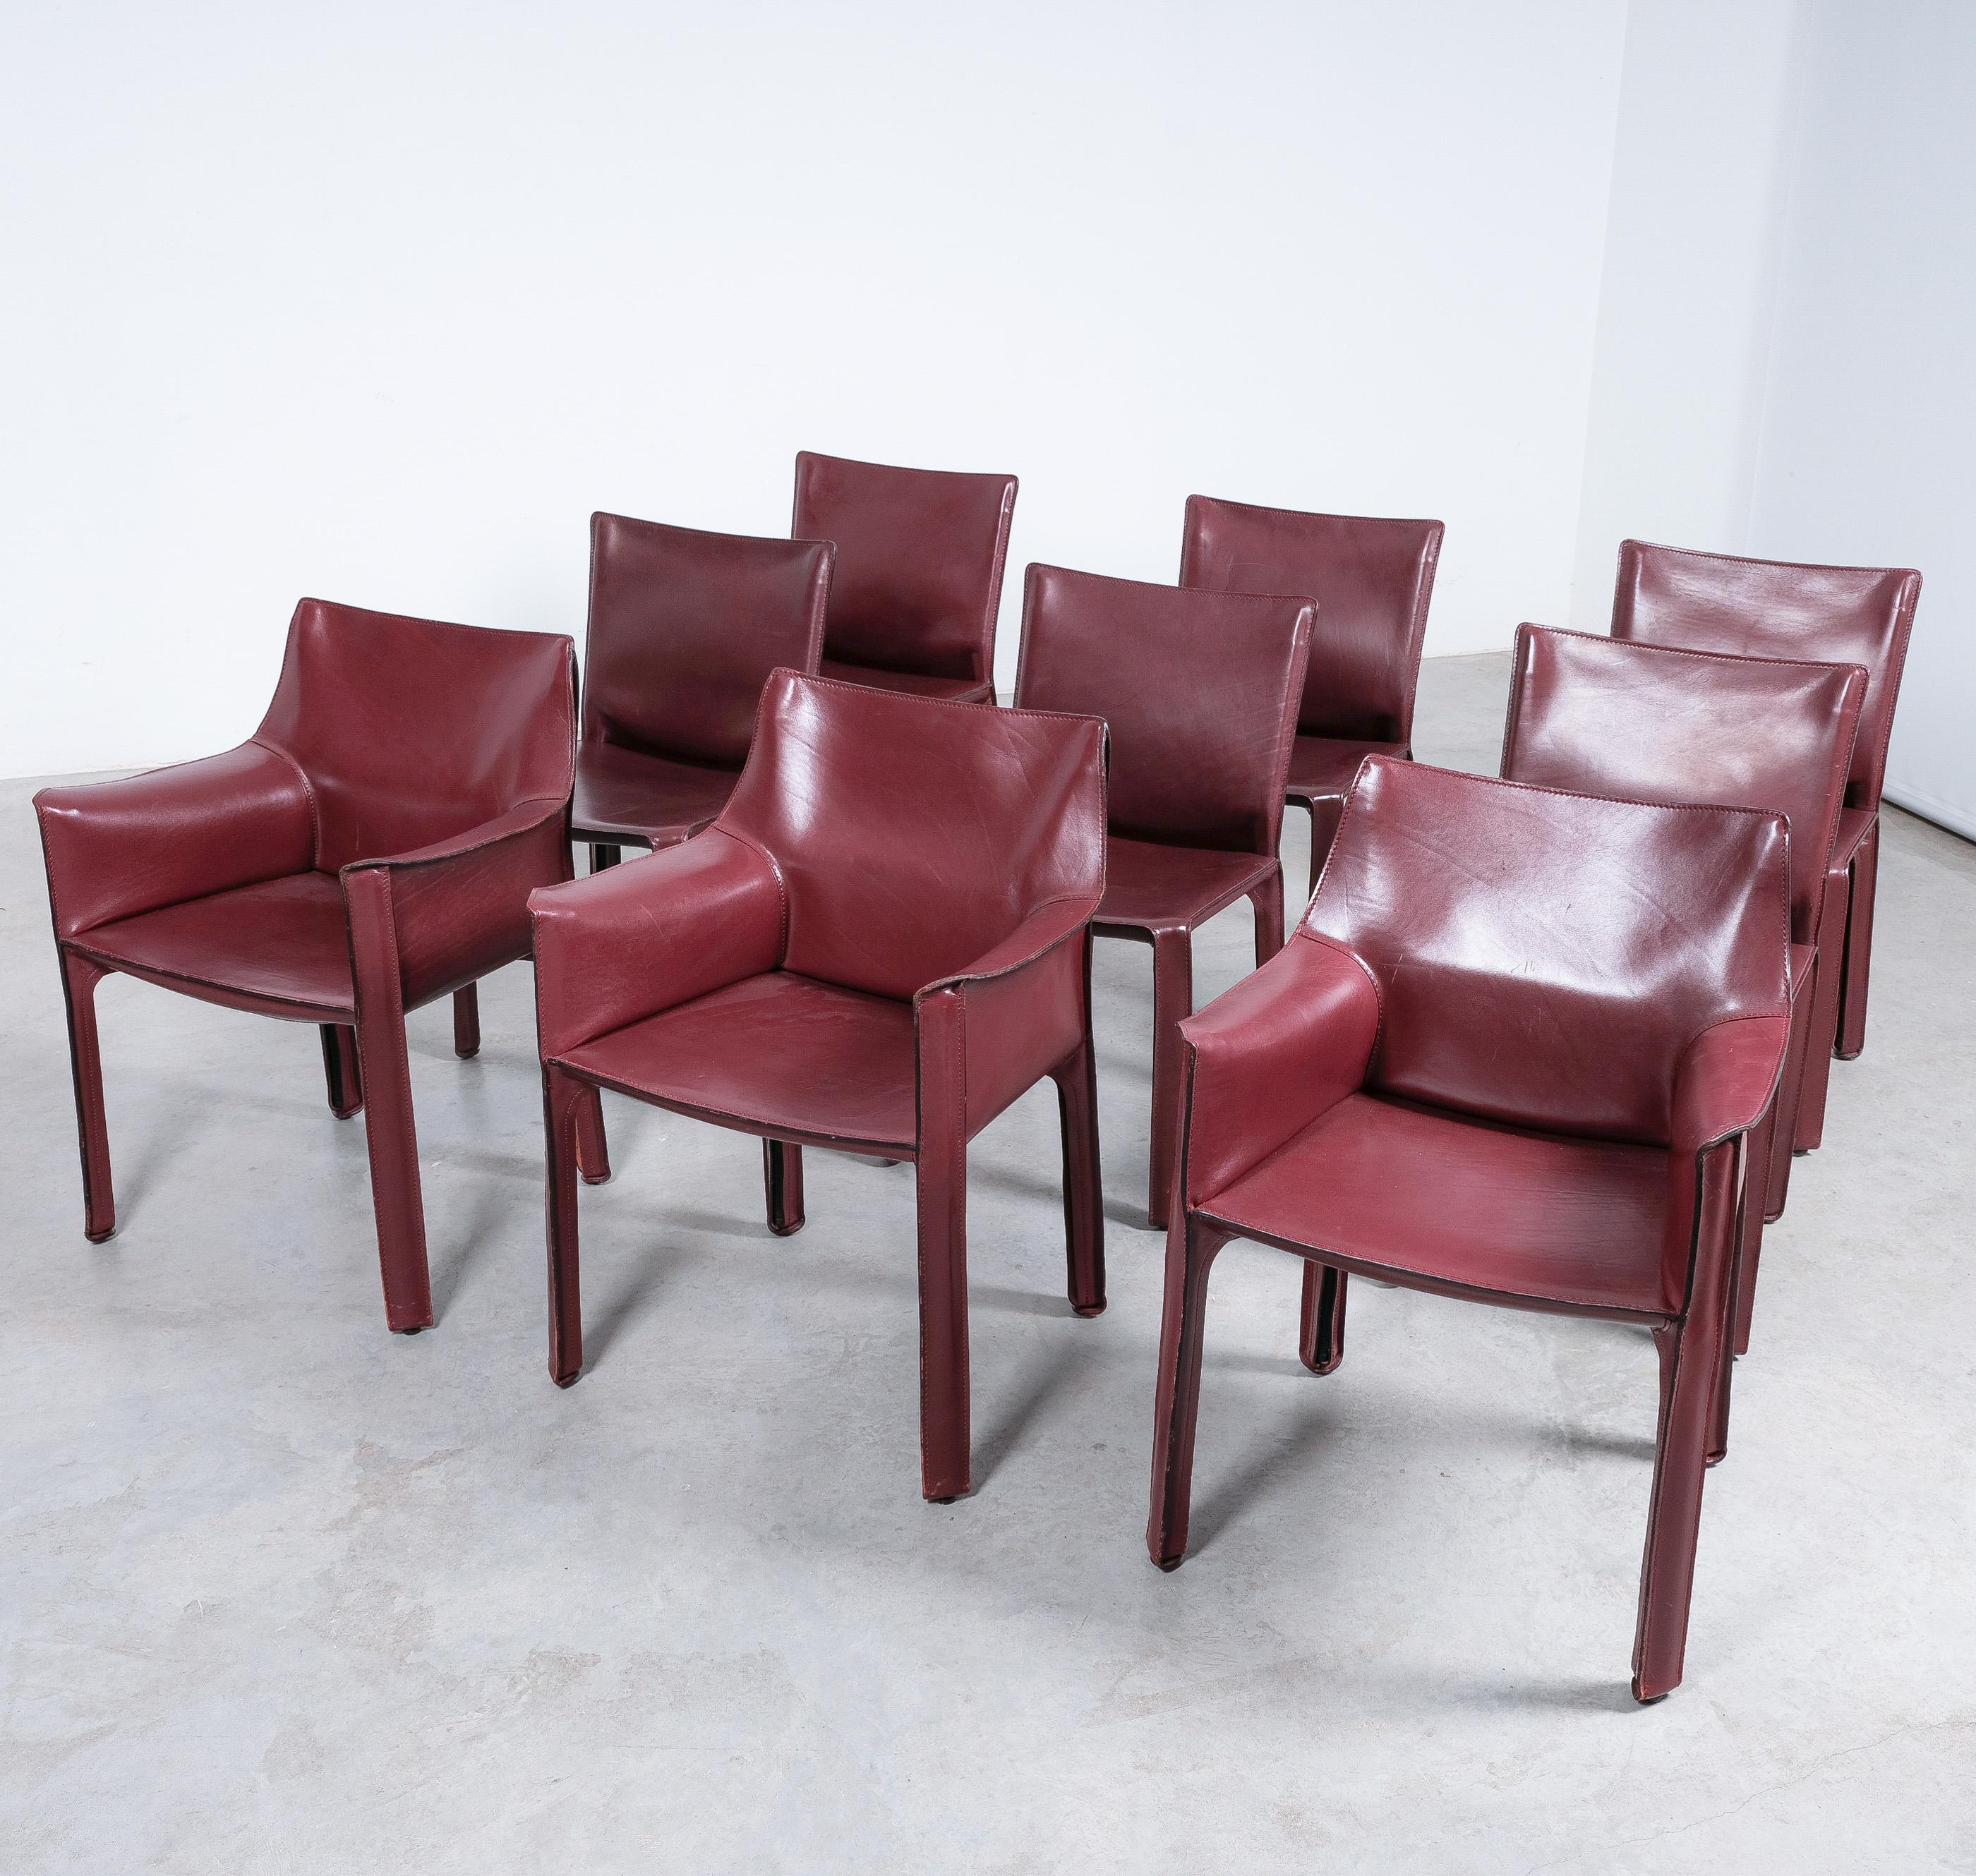 Mario Bellini Cassina Cab 412, 413 Set of Ten 9 Red Leather Dining Chairs 2